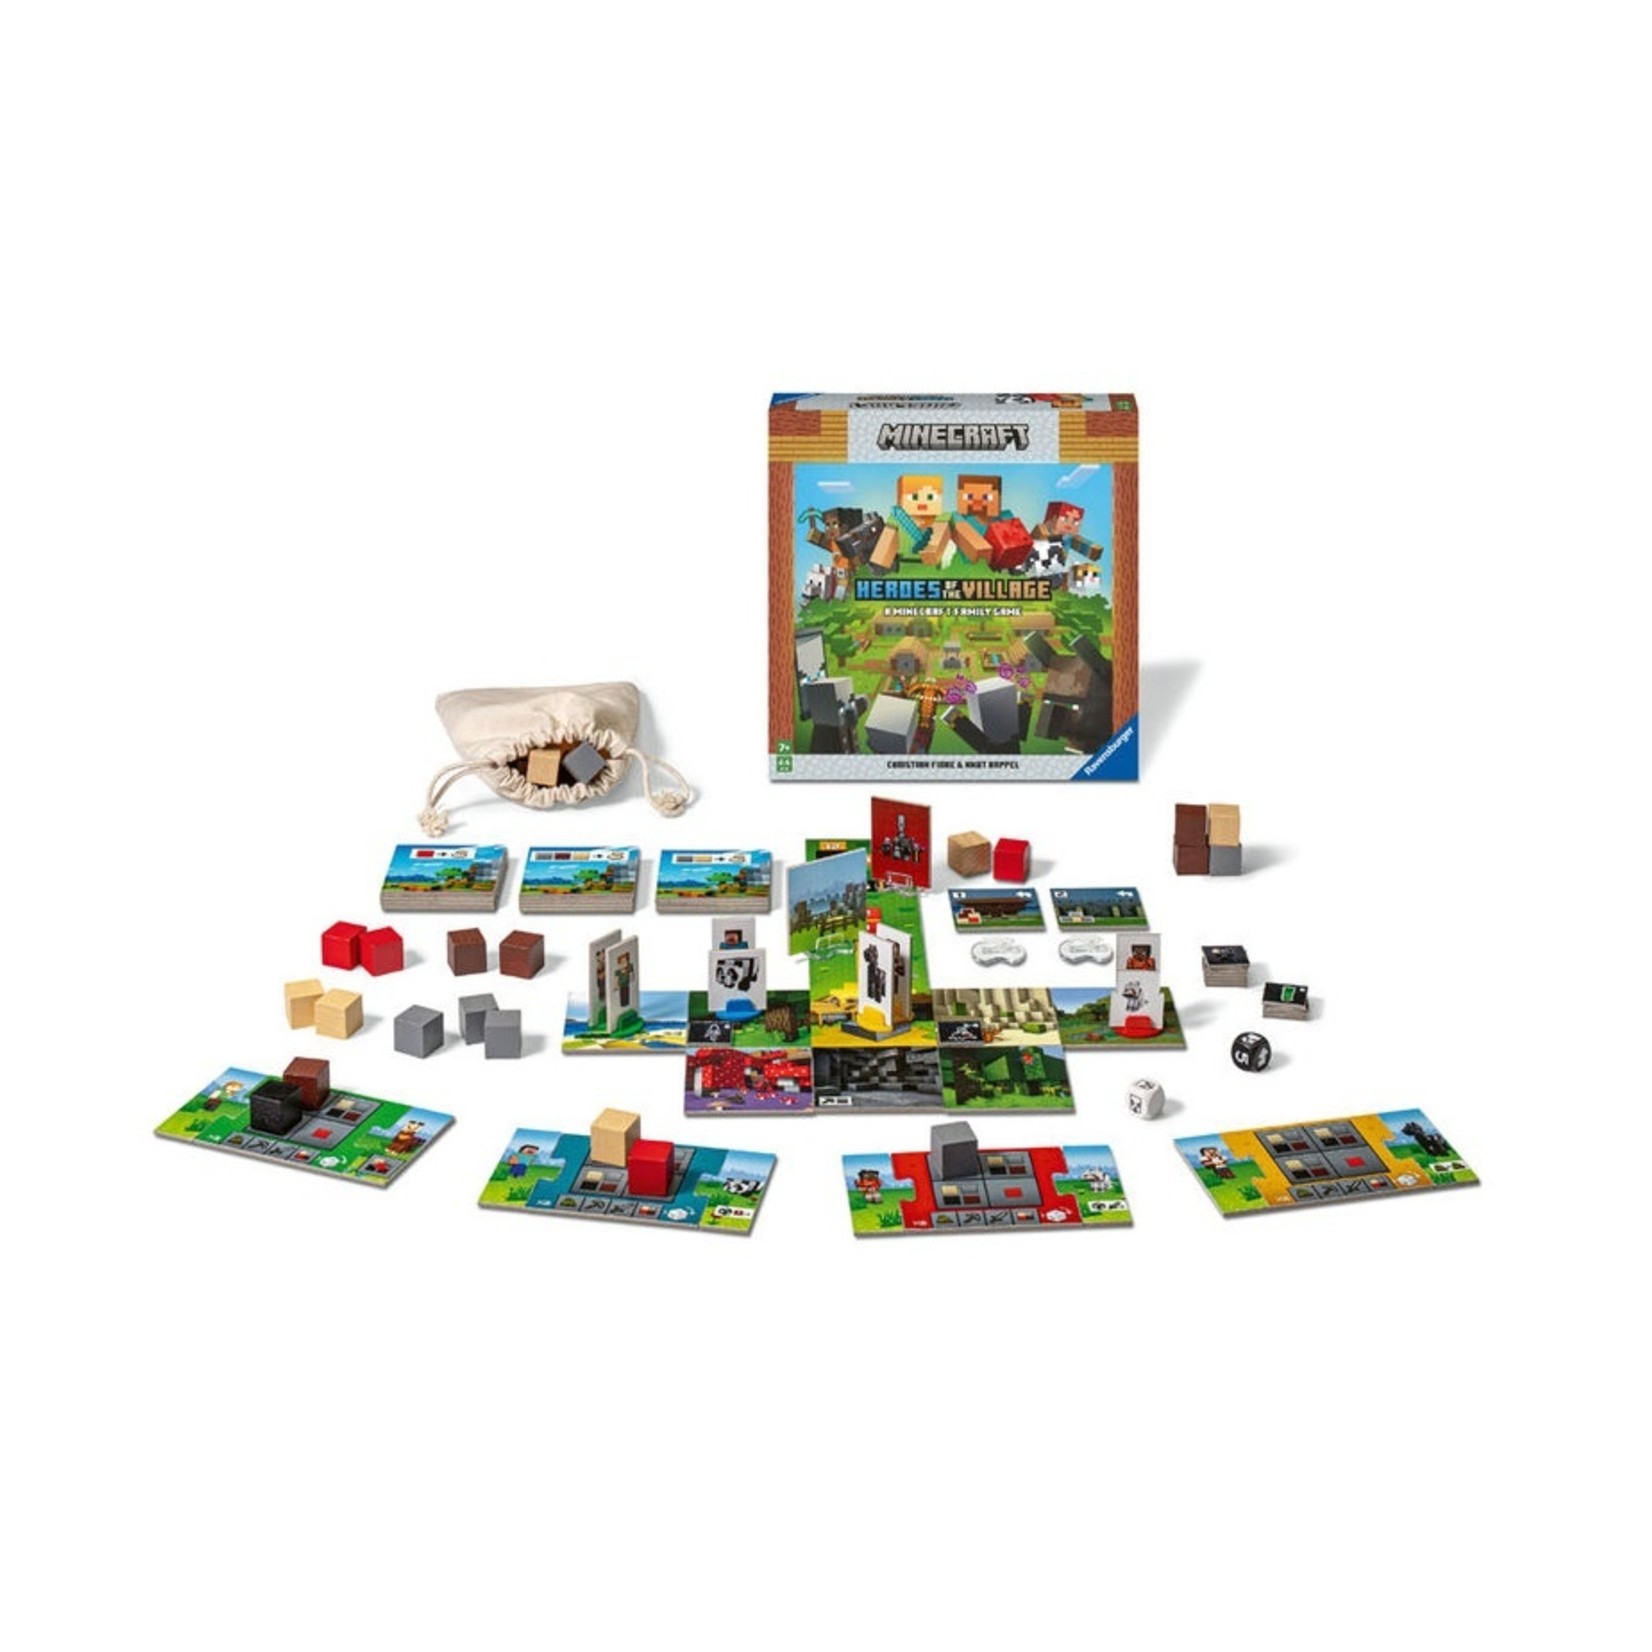 Ravensburger Minecraft - Heroes of the village